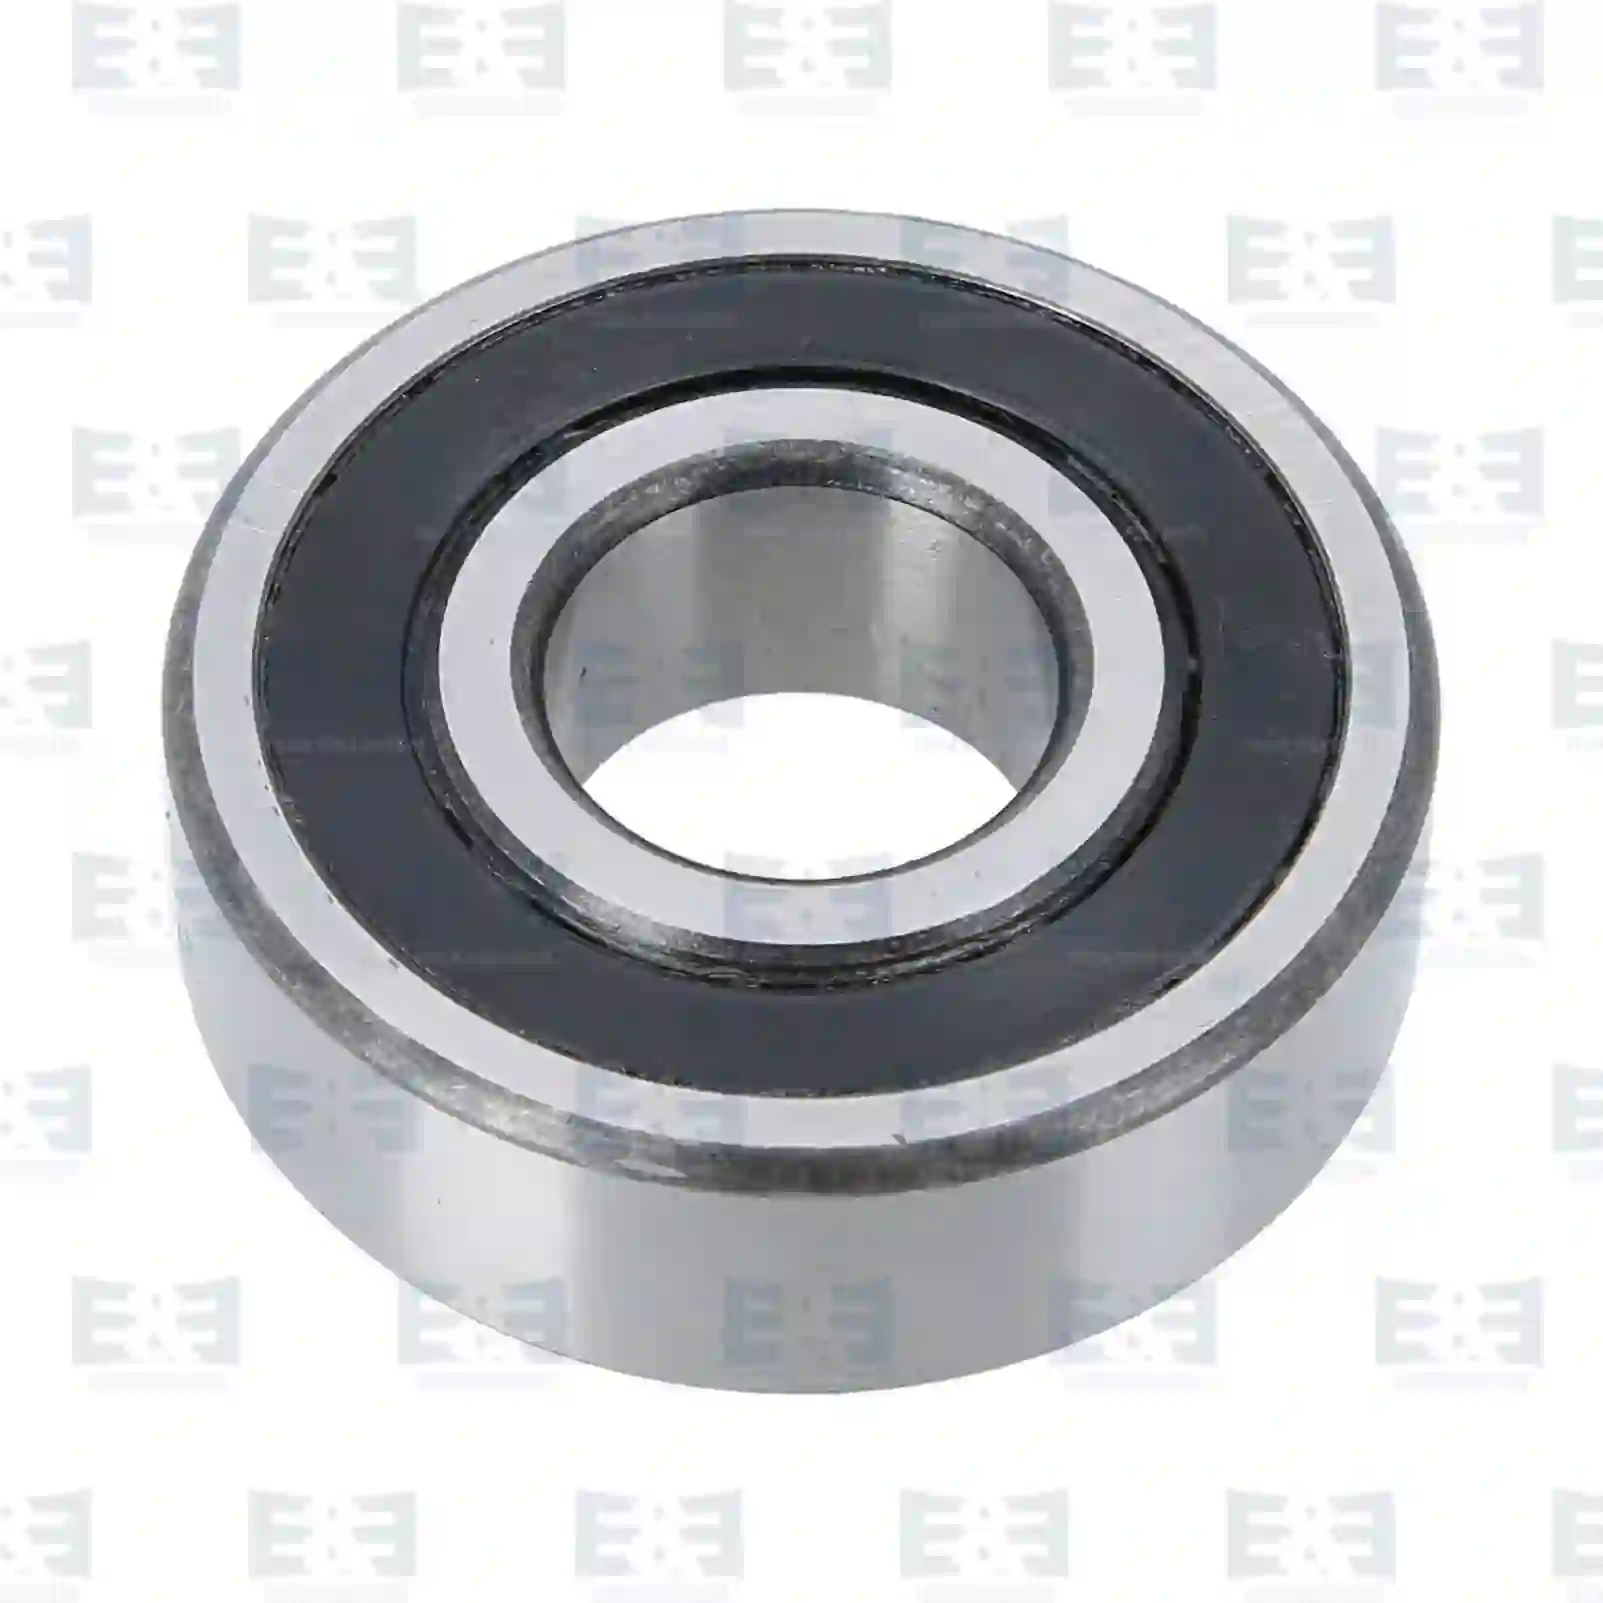 Release Lever Ball bearing, EE No 2E2288423 ,  oem no:0661319, 661319, ZG40206-0008 E&E Truck Spare Parts | Truck Spare Parts, Auotomotive Spare Parts